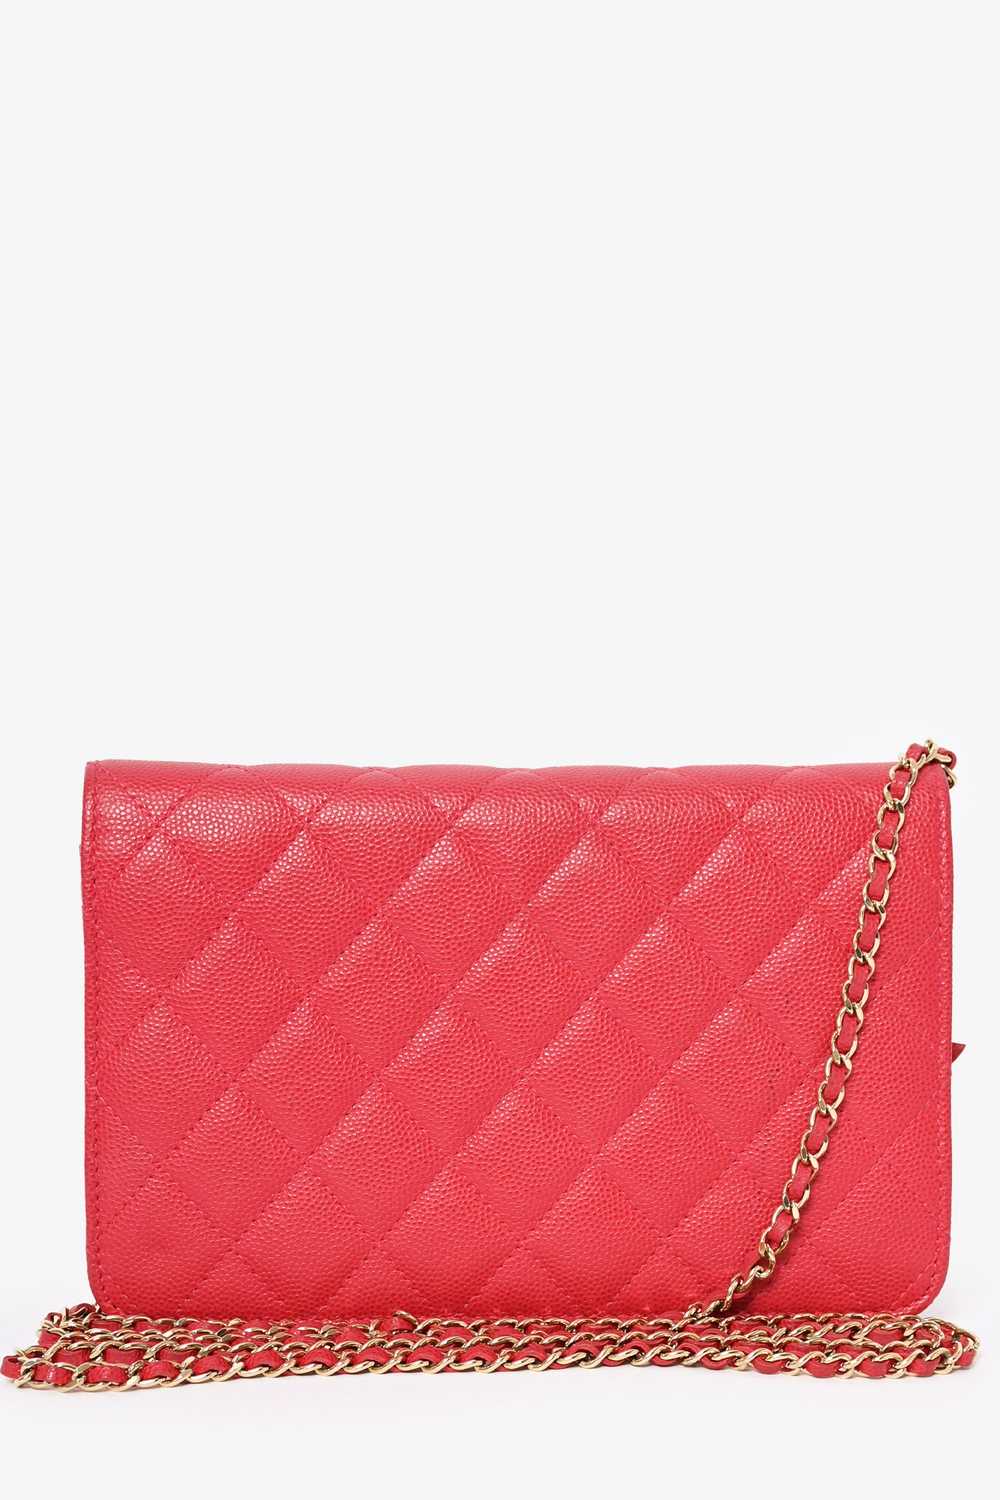 Pre-Loved Chanel™ 2016 Pink Caviar Leather Wallet… - image 2